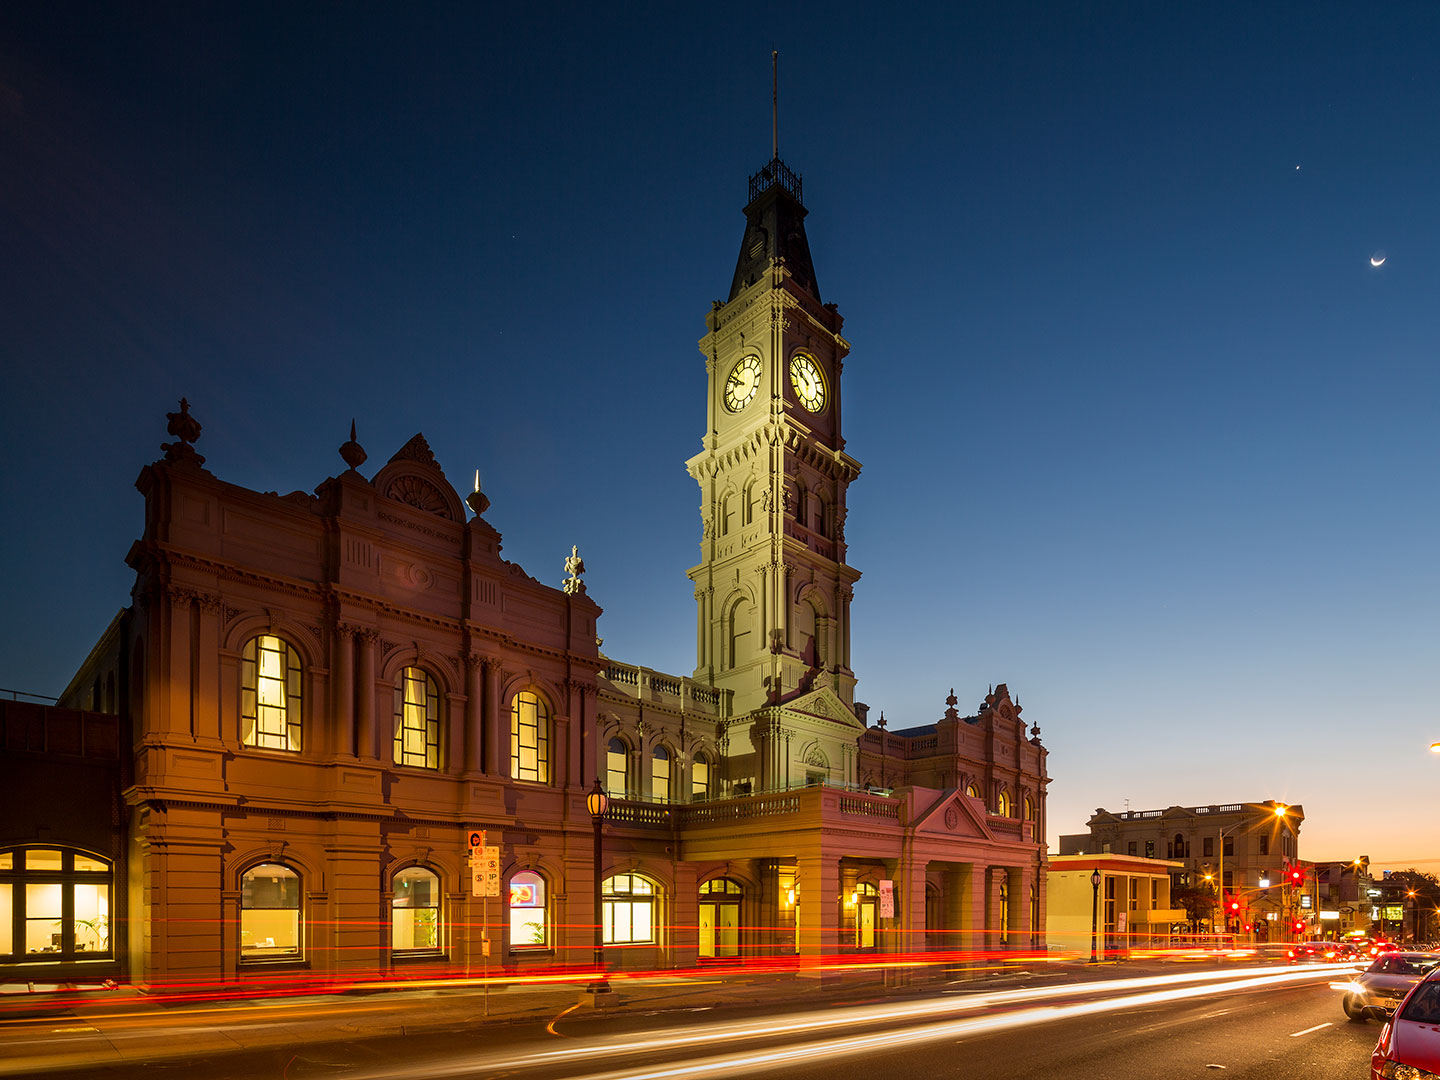 Hawthorn Town Hall by night